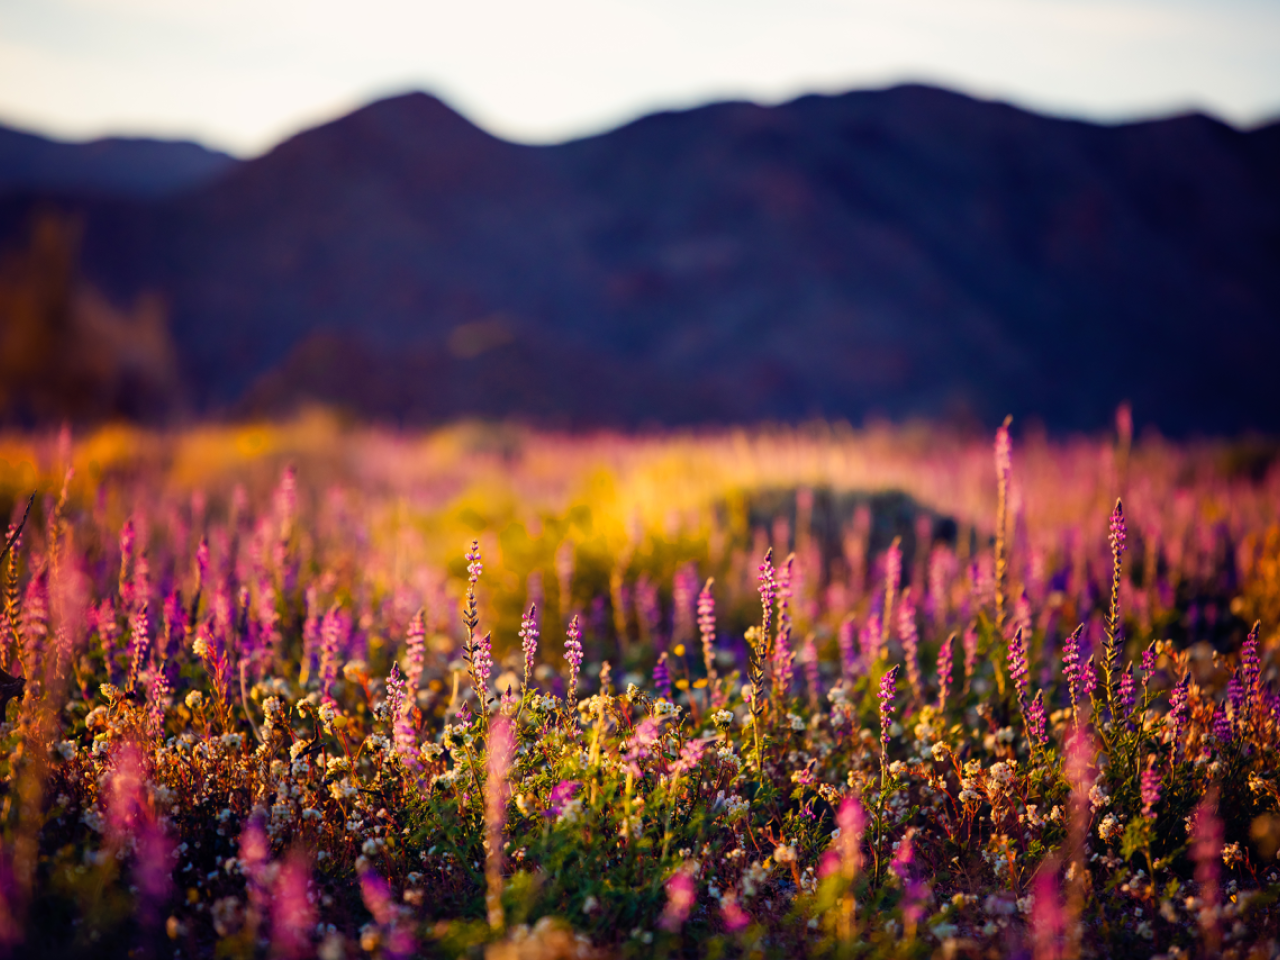 Wildflowers at the foot of a mountain